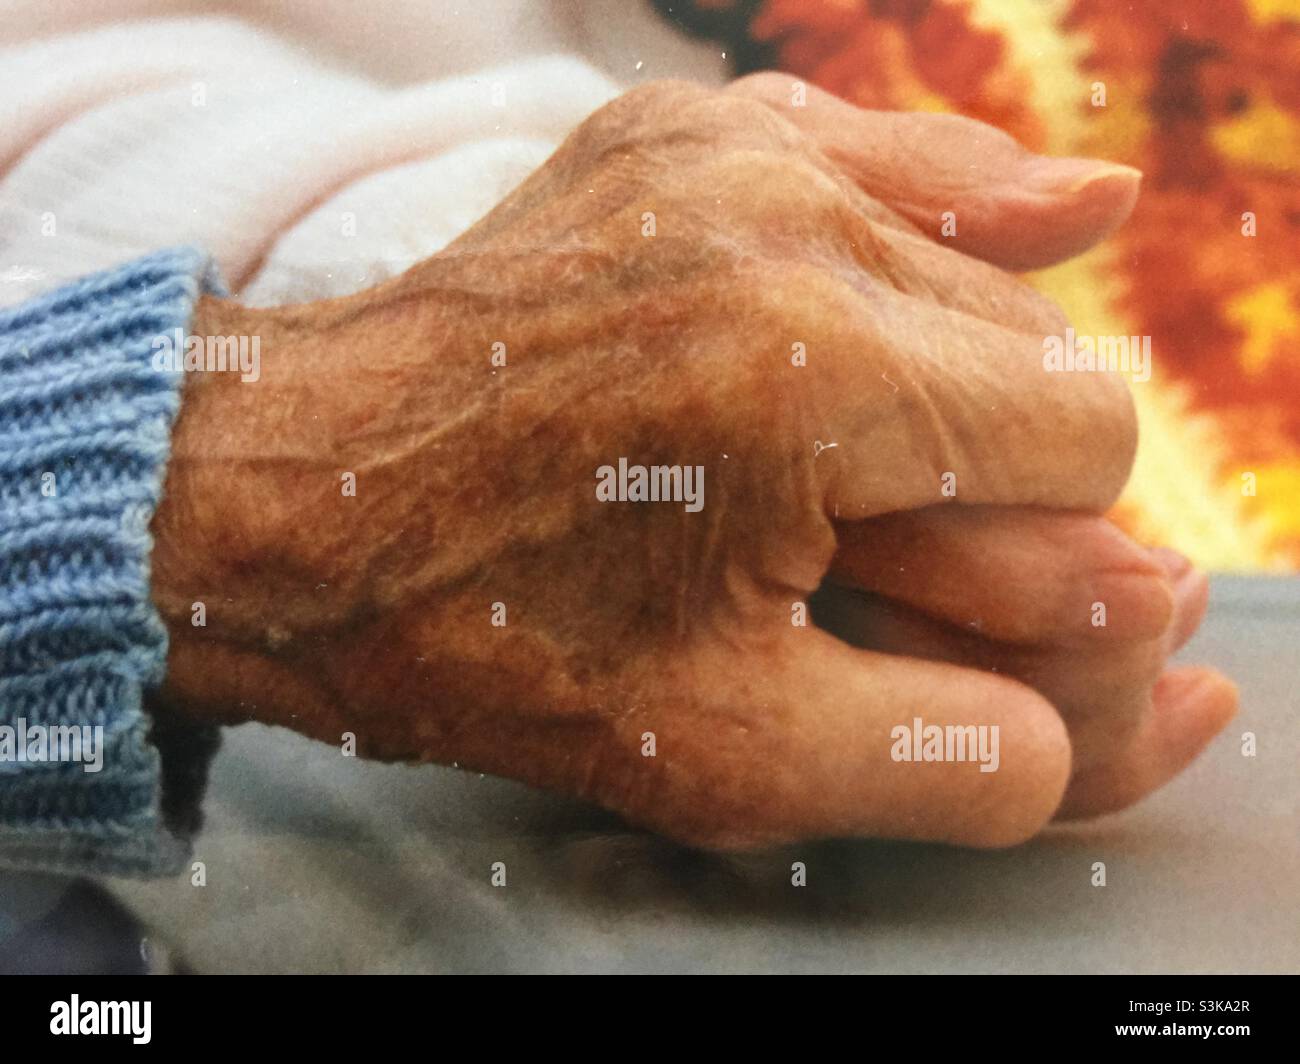 Old hands, loving hands, helping hands, Stock Photo